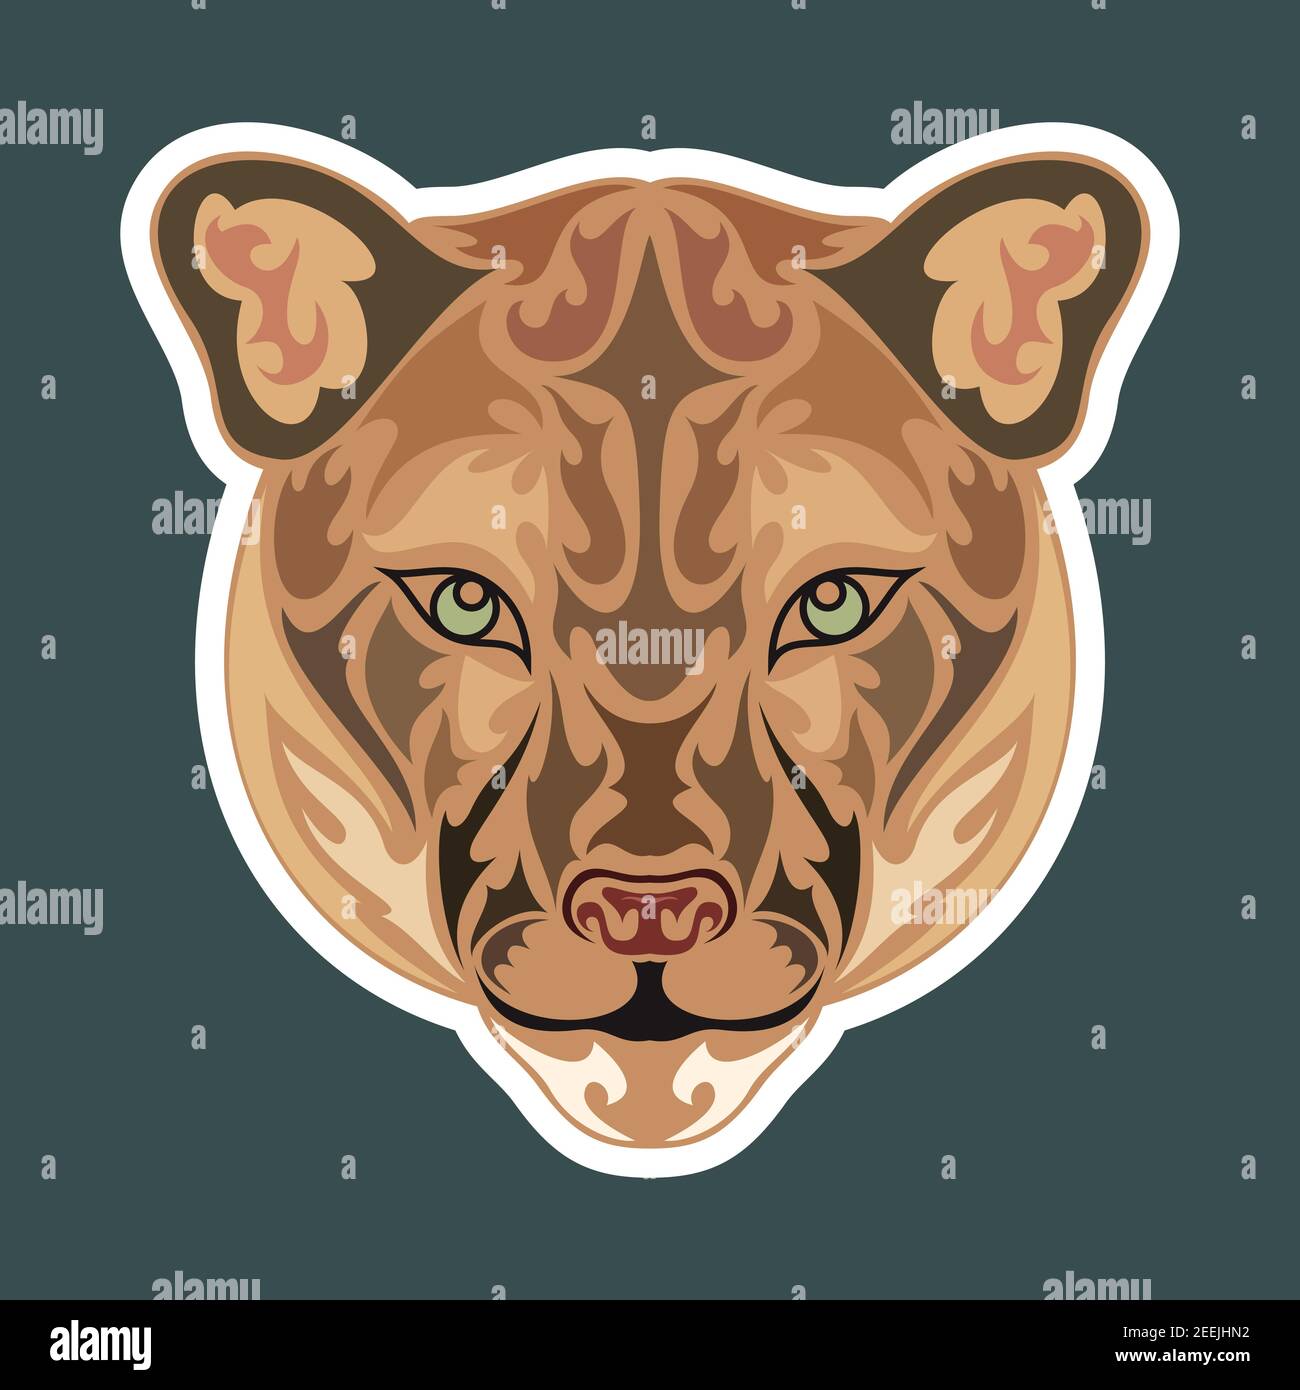 Hand drawn abstract portrait of a puma. Sticker. Vector stylized colorful illustration isolated on dark background. Stock Vector